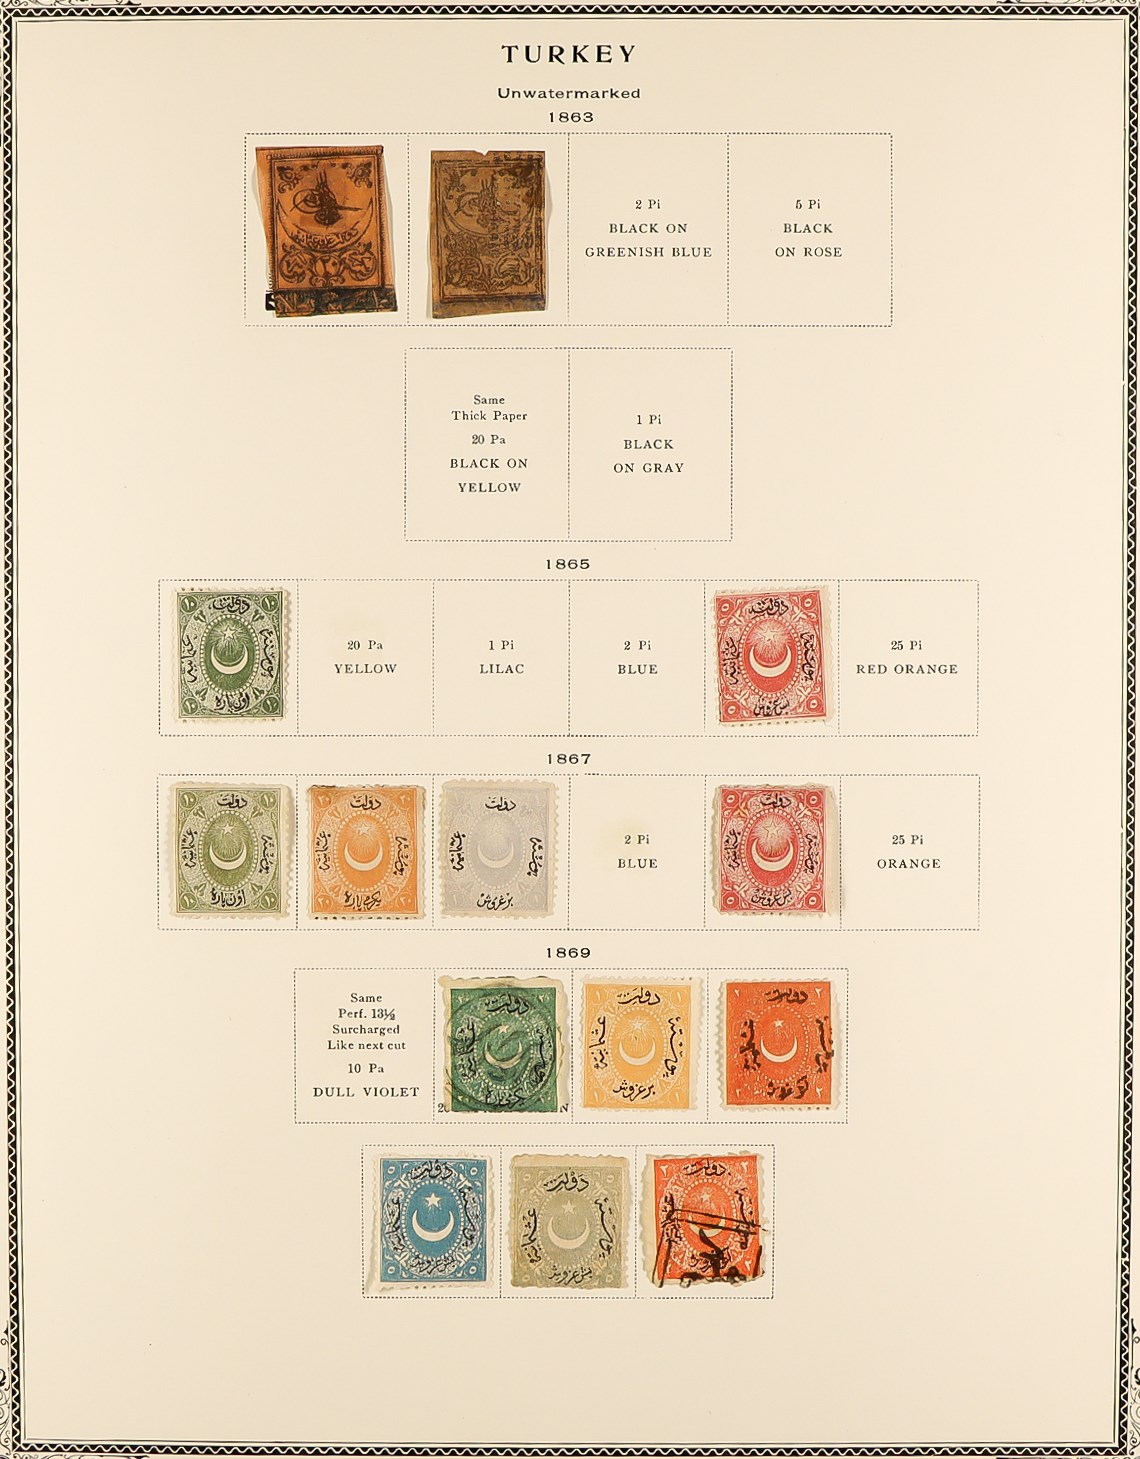 TURKEY 1863 - 1973 COLLECTION of approx. 1500 mint & used stamps in large 'Scott' Turkey album, note